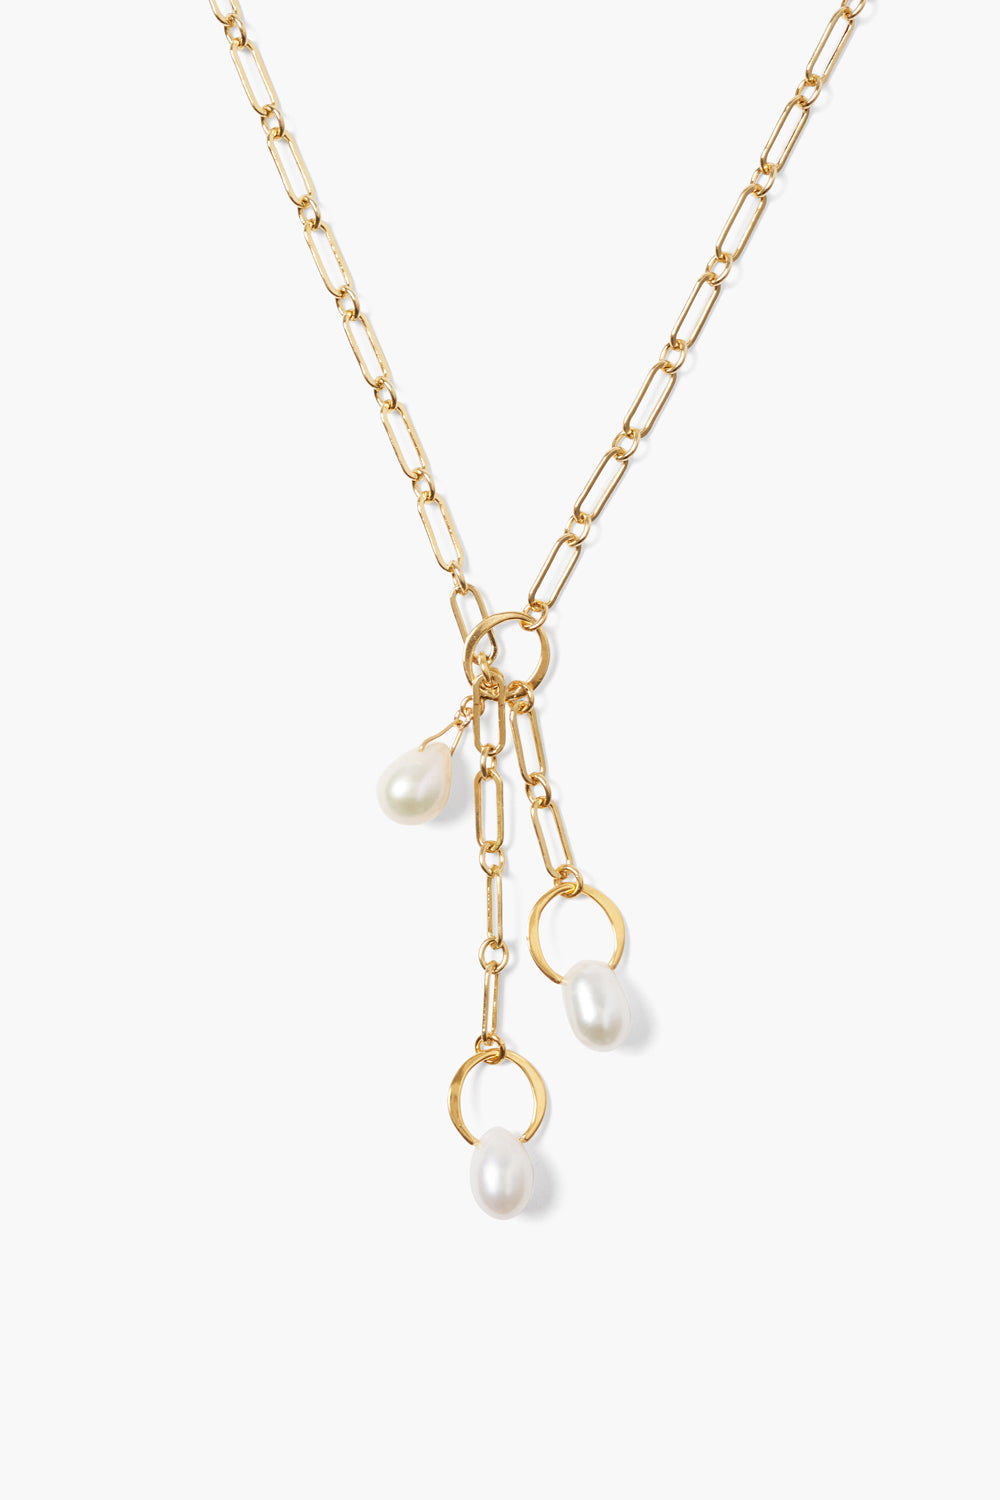 Tamsyn White Pearl Necklace